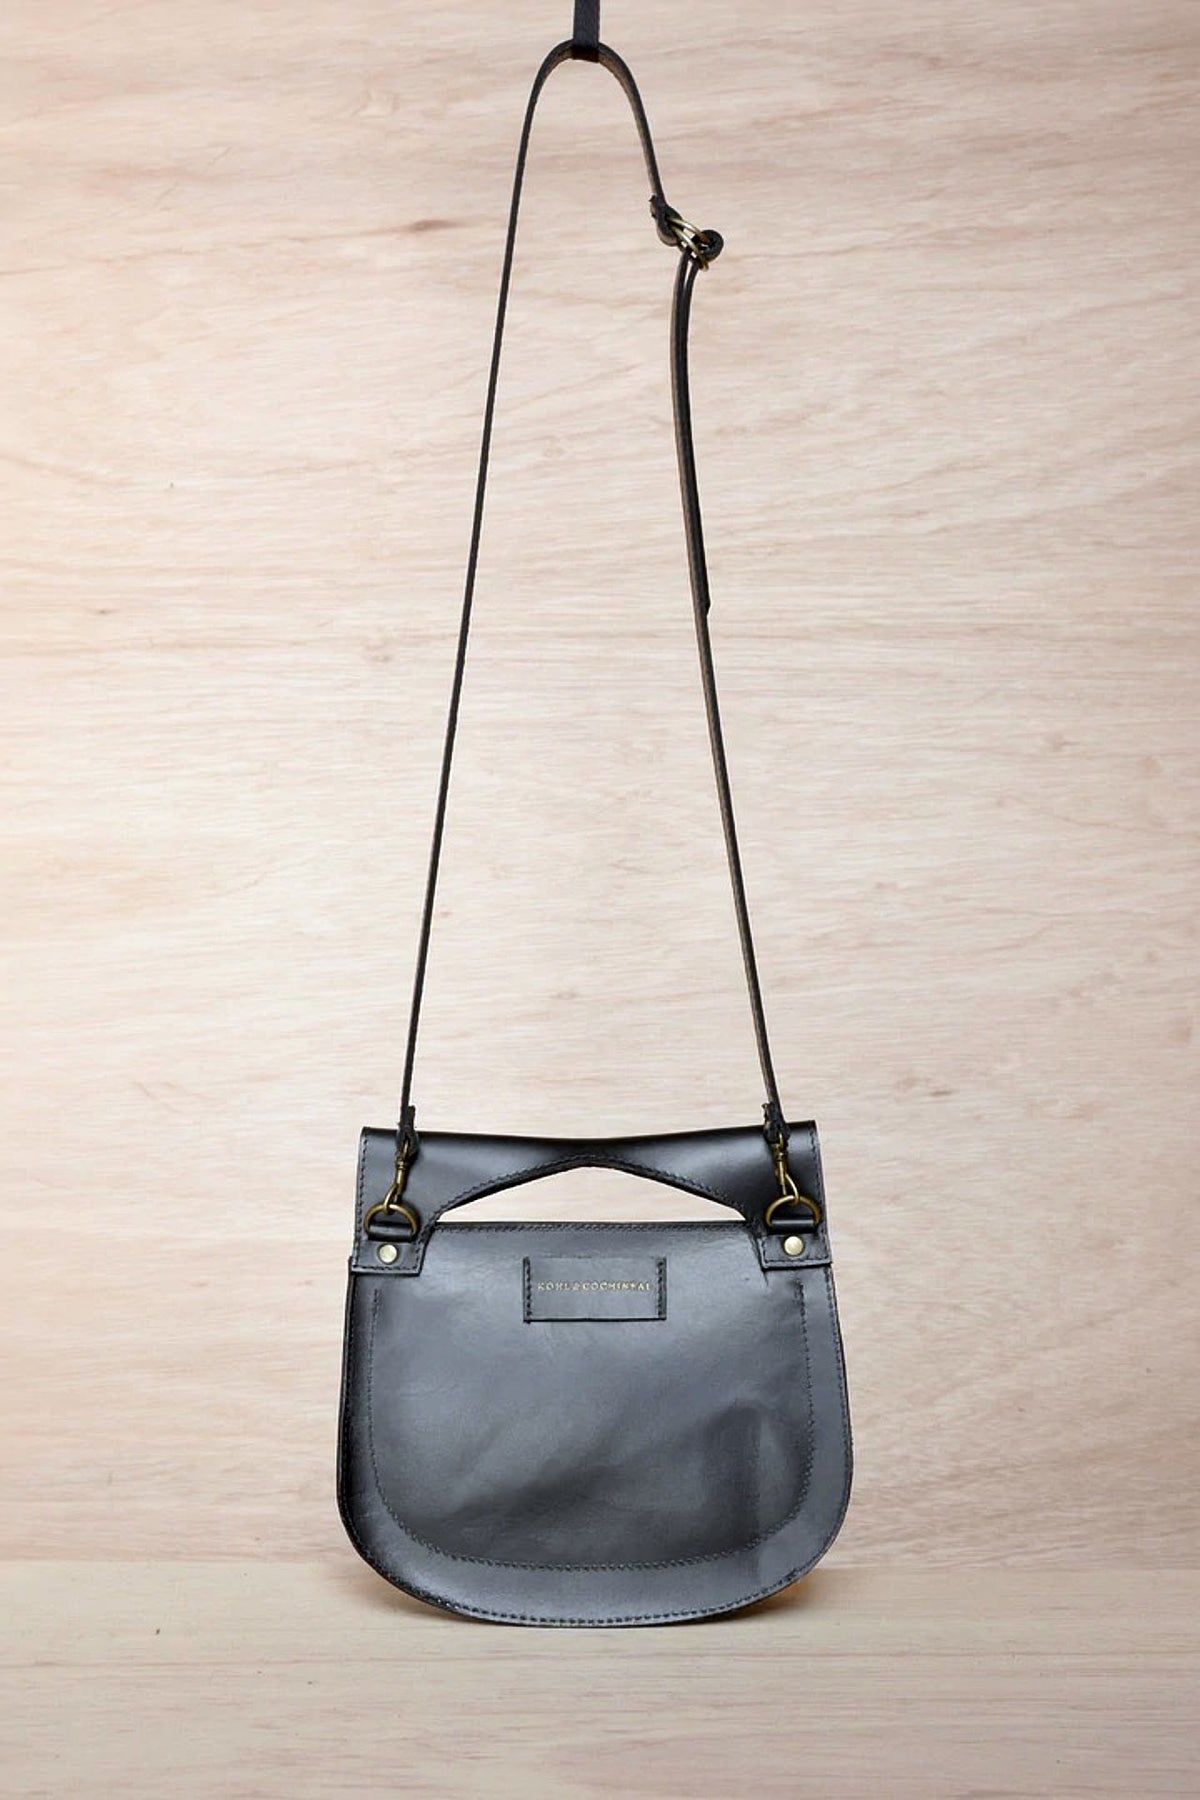 A small grey leather Cat bag hanging on a wooden wall.